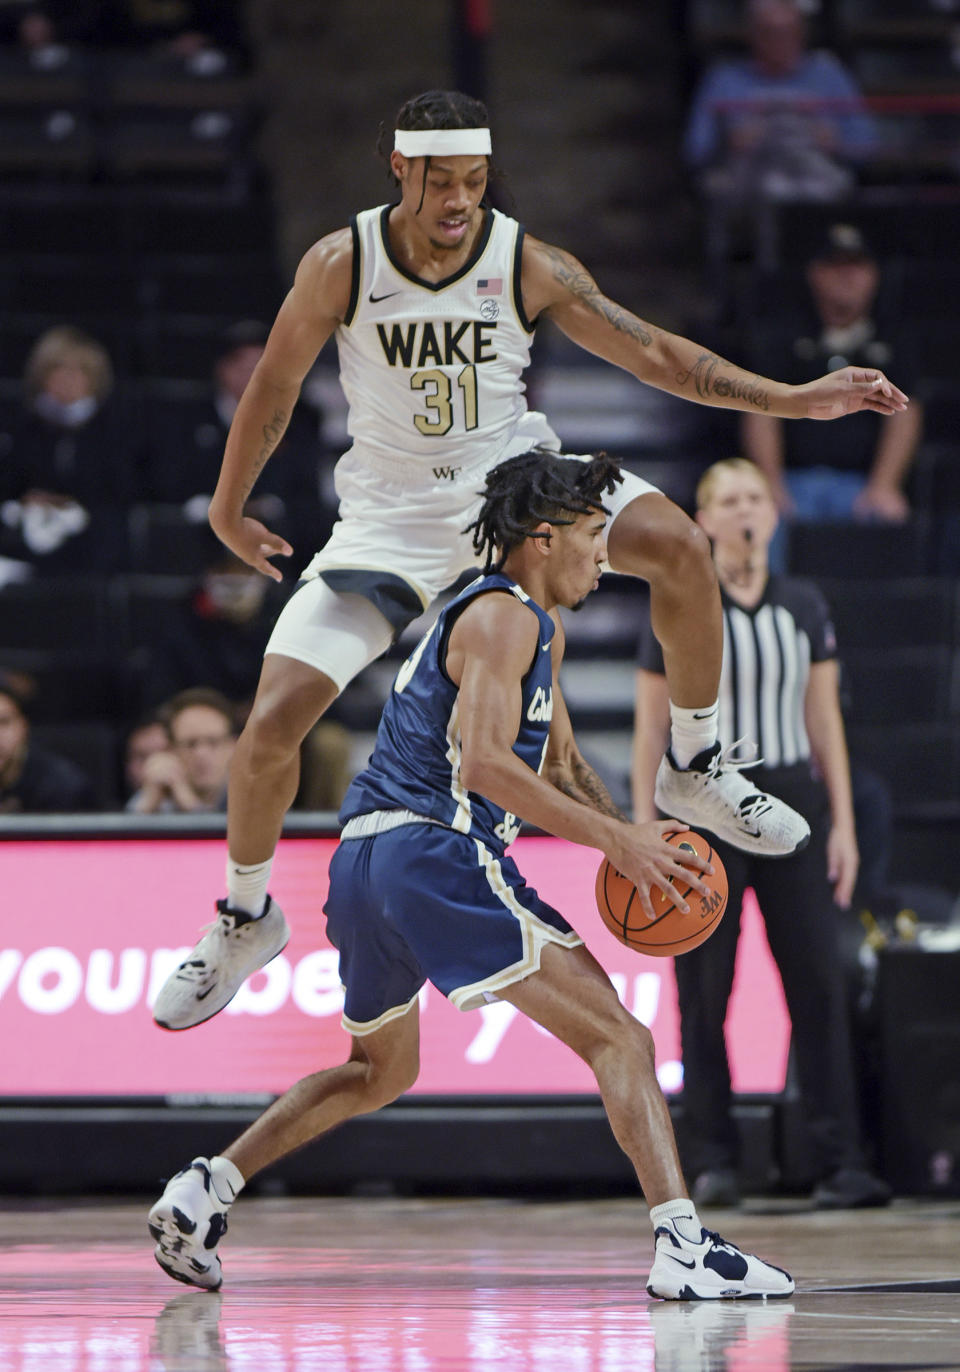 Wake Forest's Alondes Williams guards Charleston Southern's Tahlik Chavez during the first half of an NCAA college basketball game Wednesday, Nov. 17, 2021, in Winston-Salem, N.C. (Walt Unks/The Winston-Salem Journal via AP)